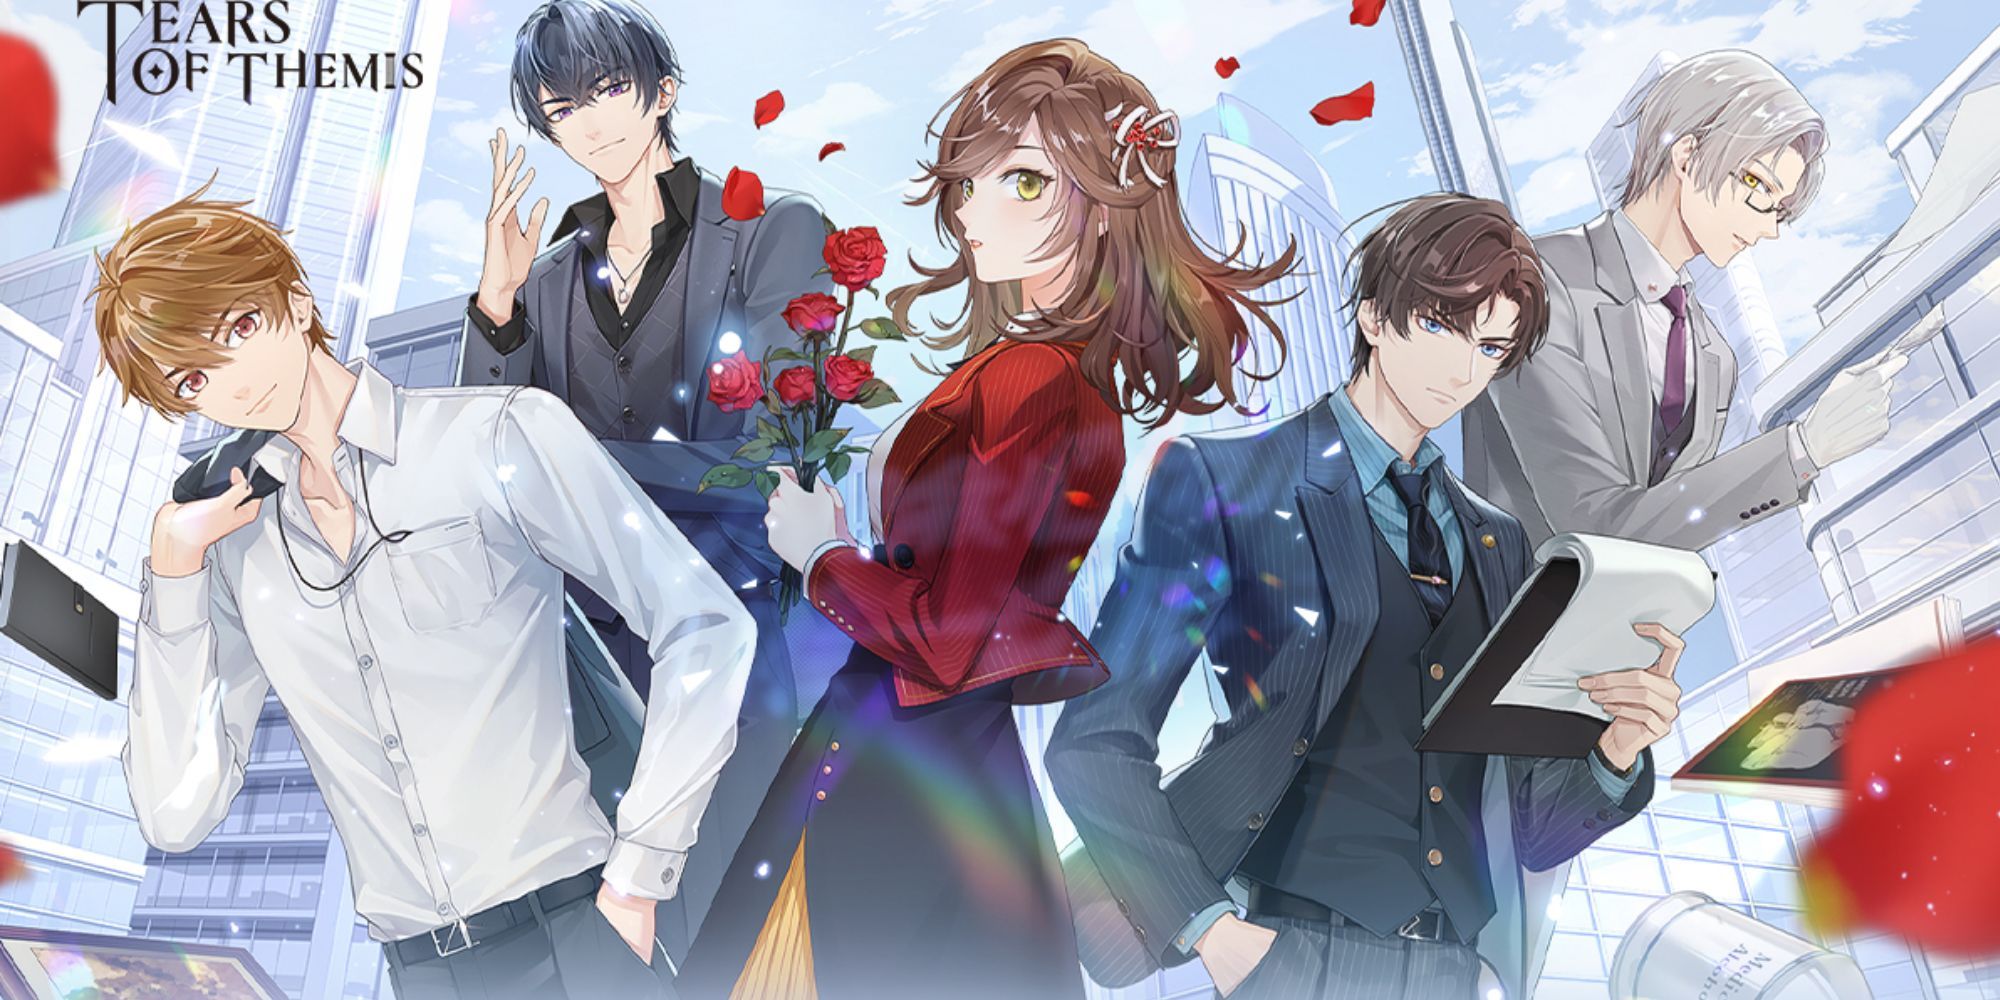 Otome Games- Tears of Themis